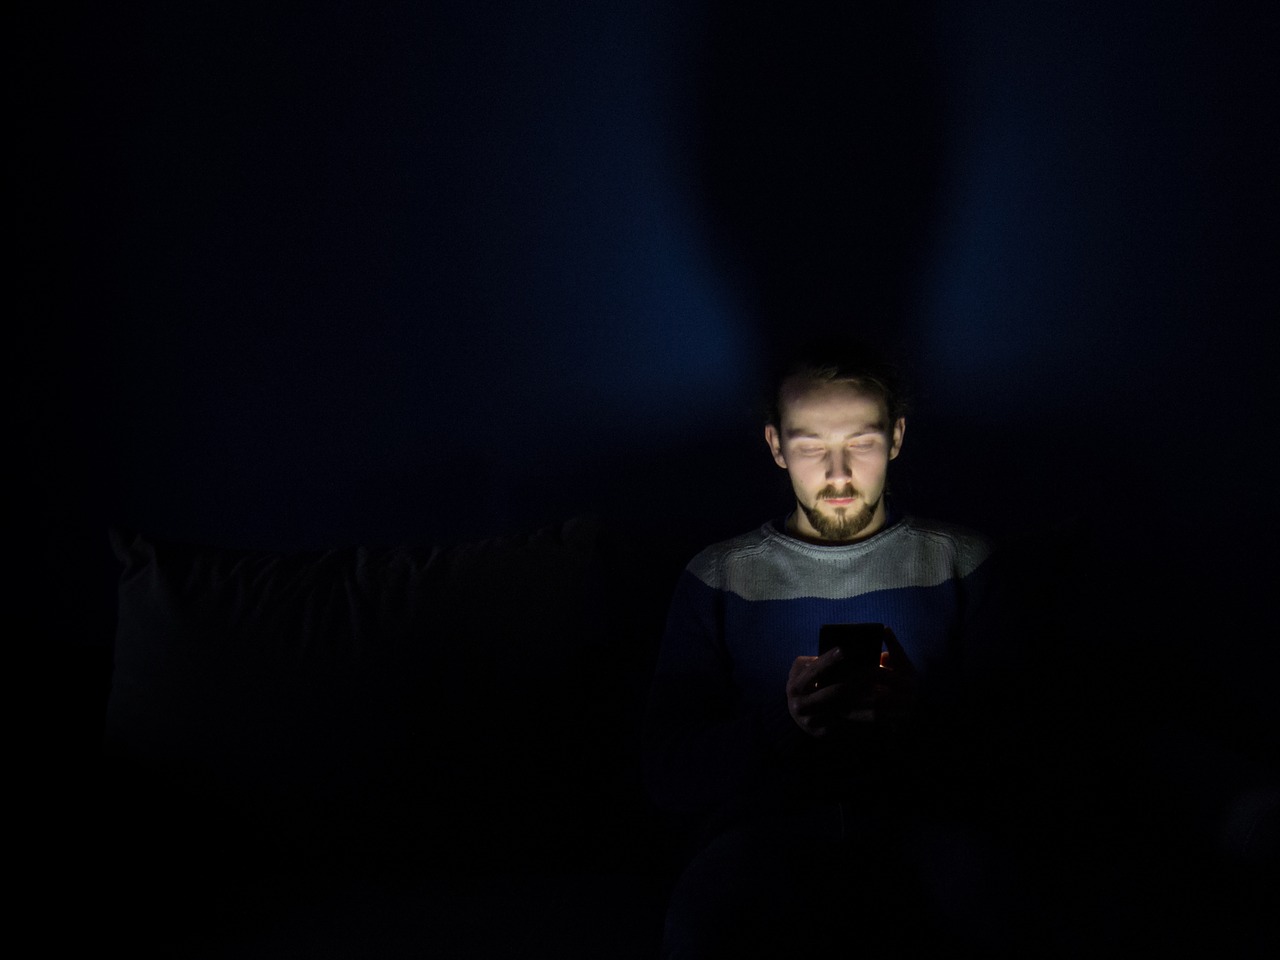 man silhoutted by computer screen at night